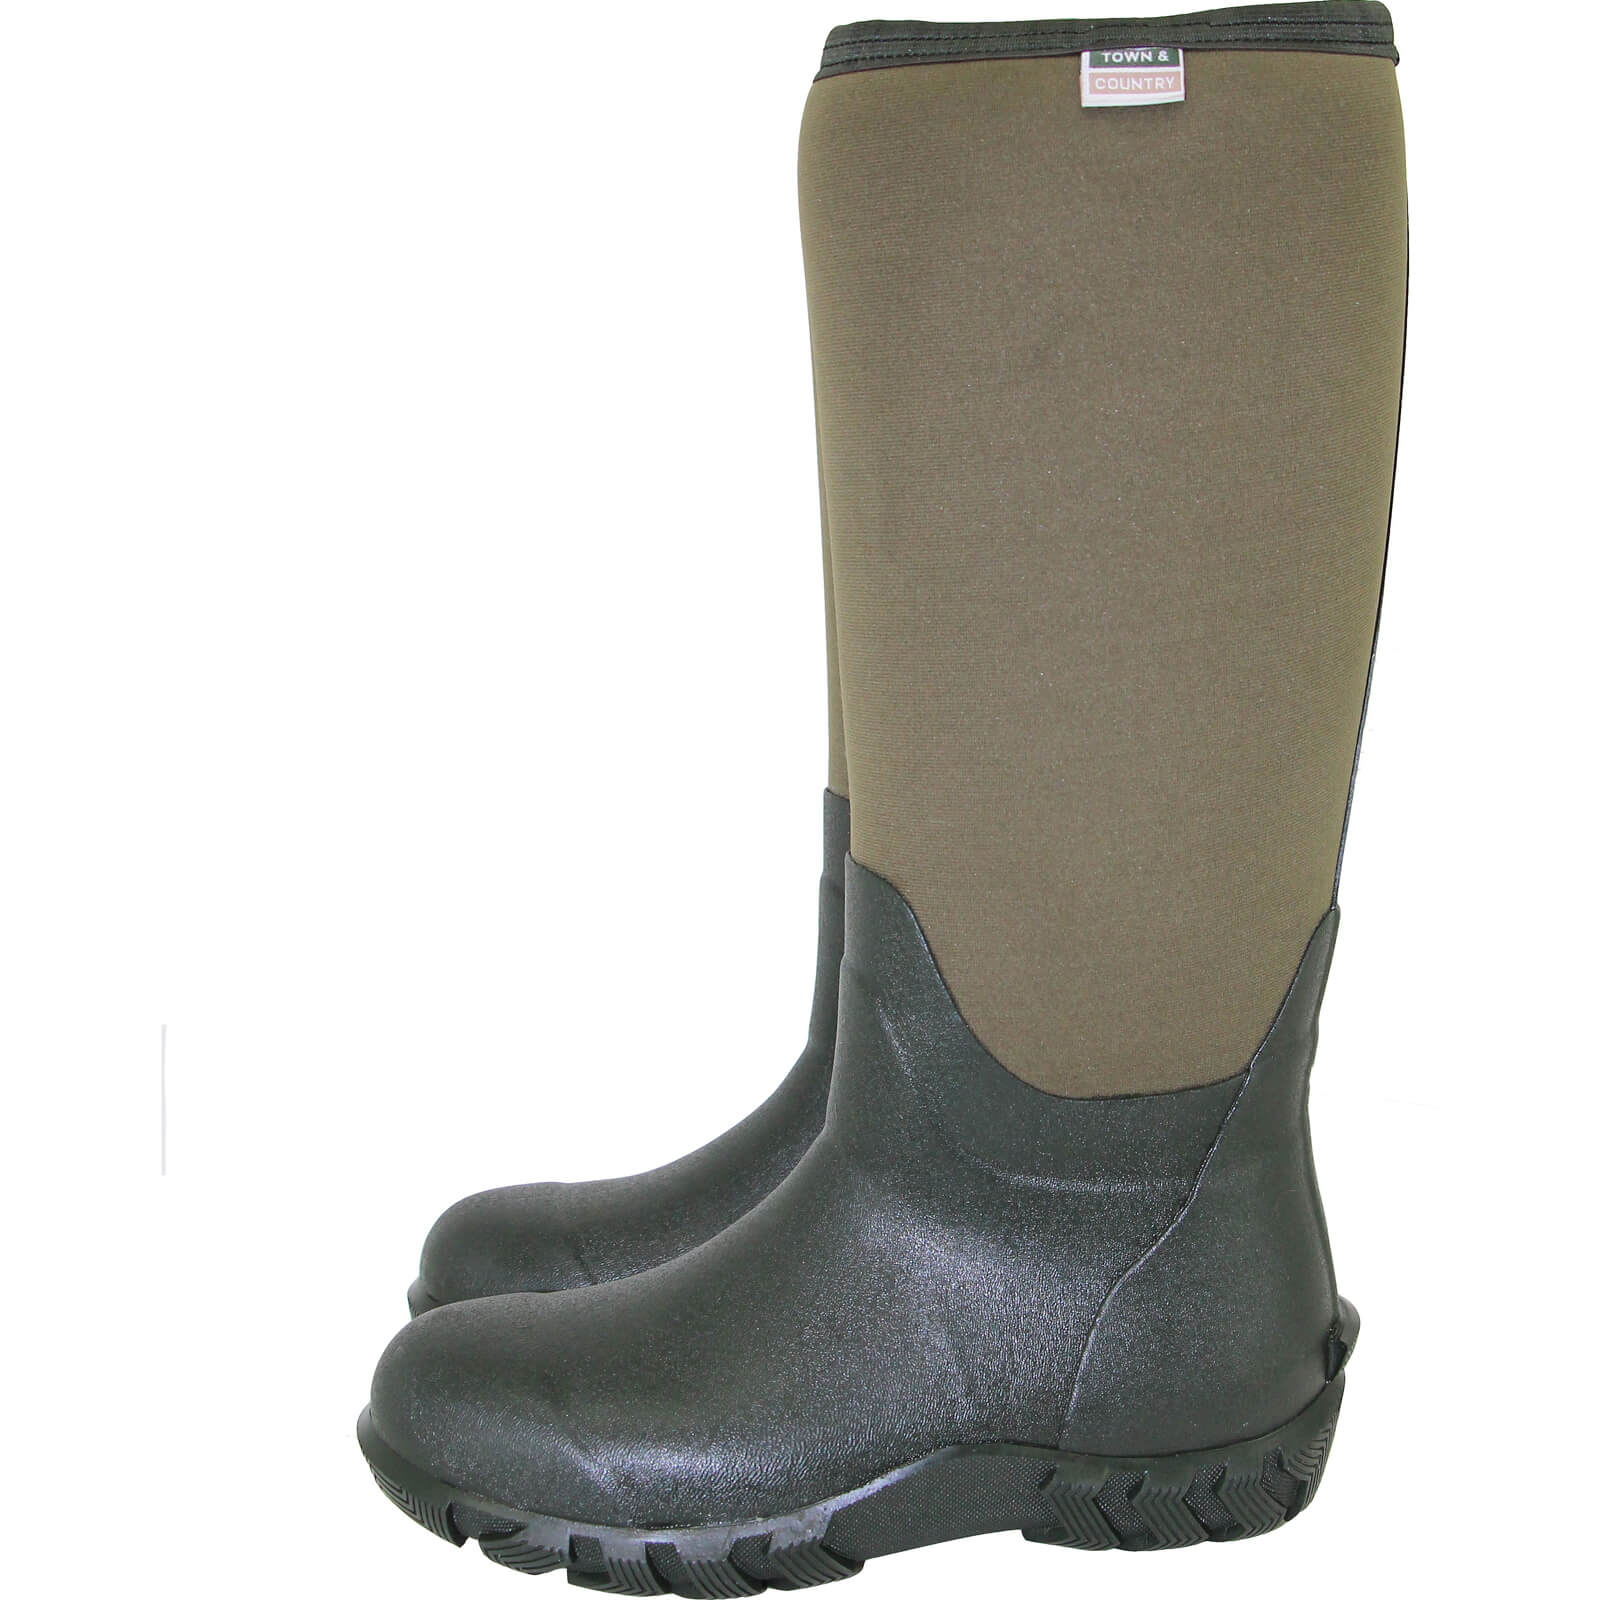 Image of Town and Country Buckingham Rubber Wellington Boots Green Size 7